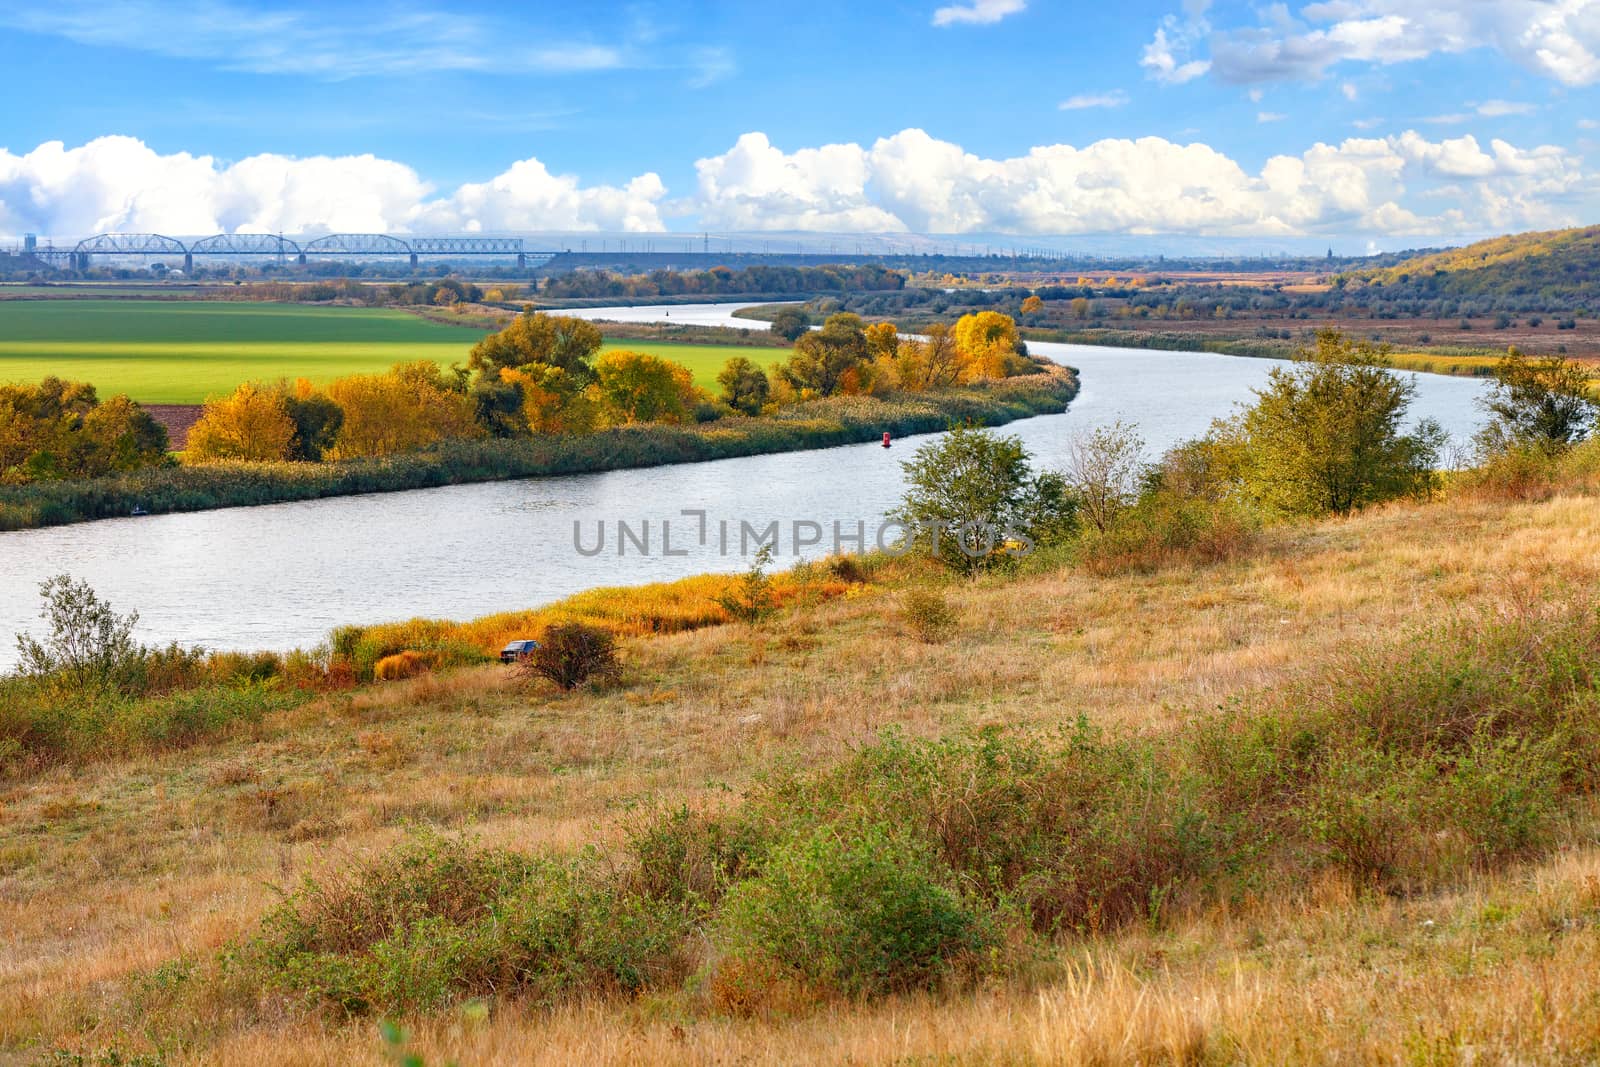 A beautiful autumn landscape with a smooth bend of the river among the plain against the background of a railway bridge on the horizon and a blue sky with white clouds.